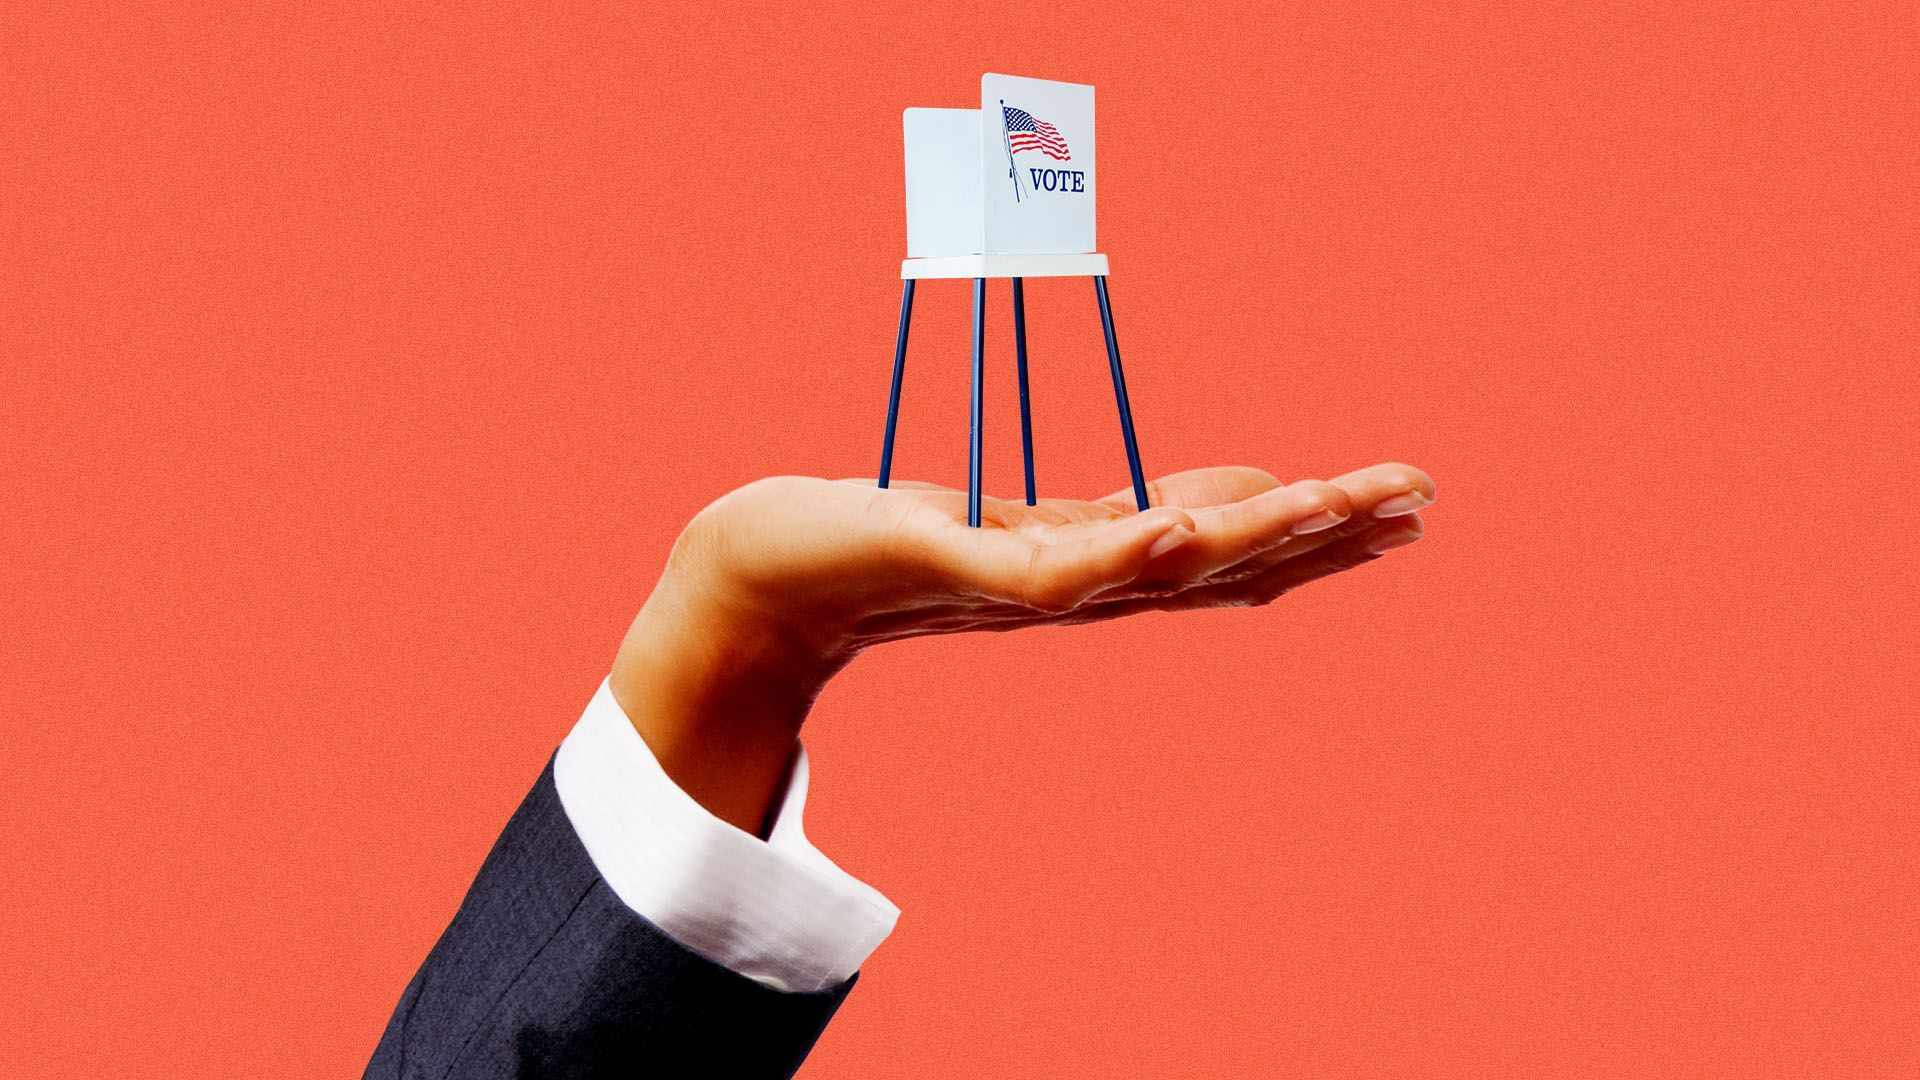 Hand holding up voting booth